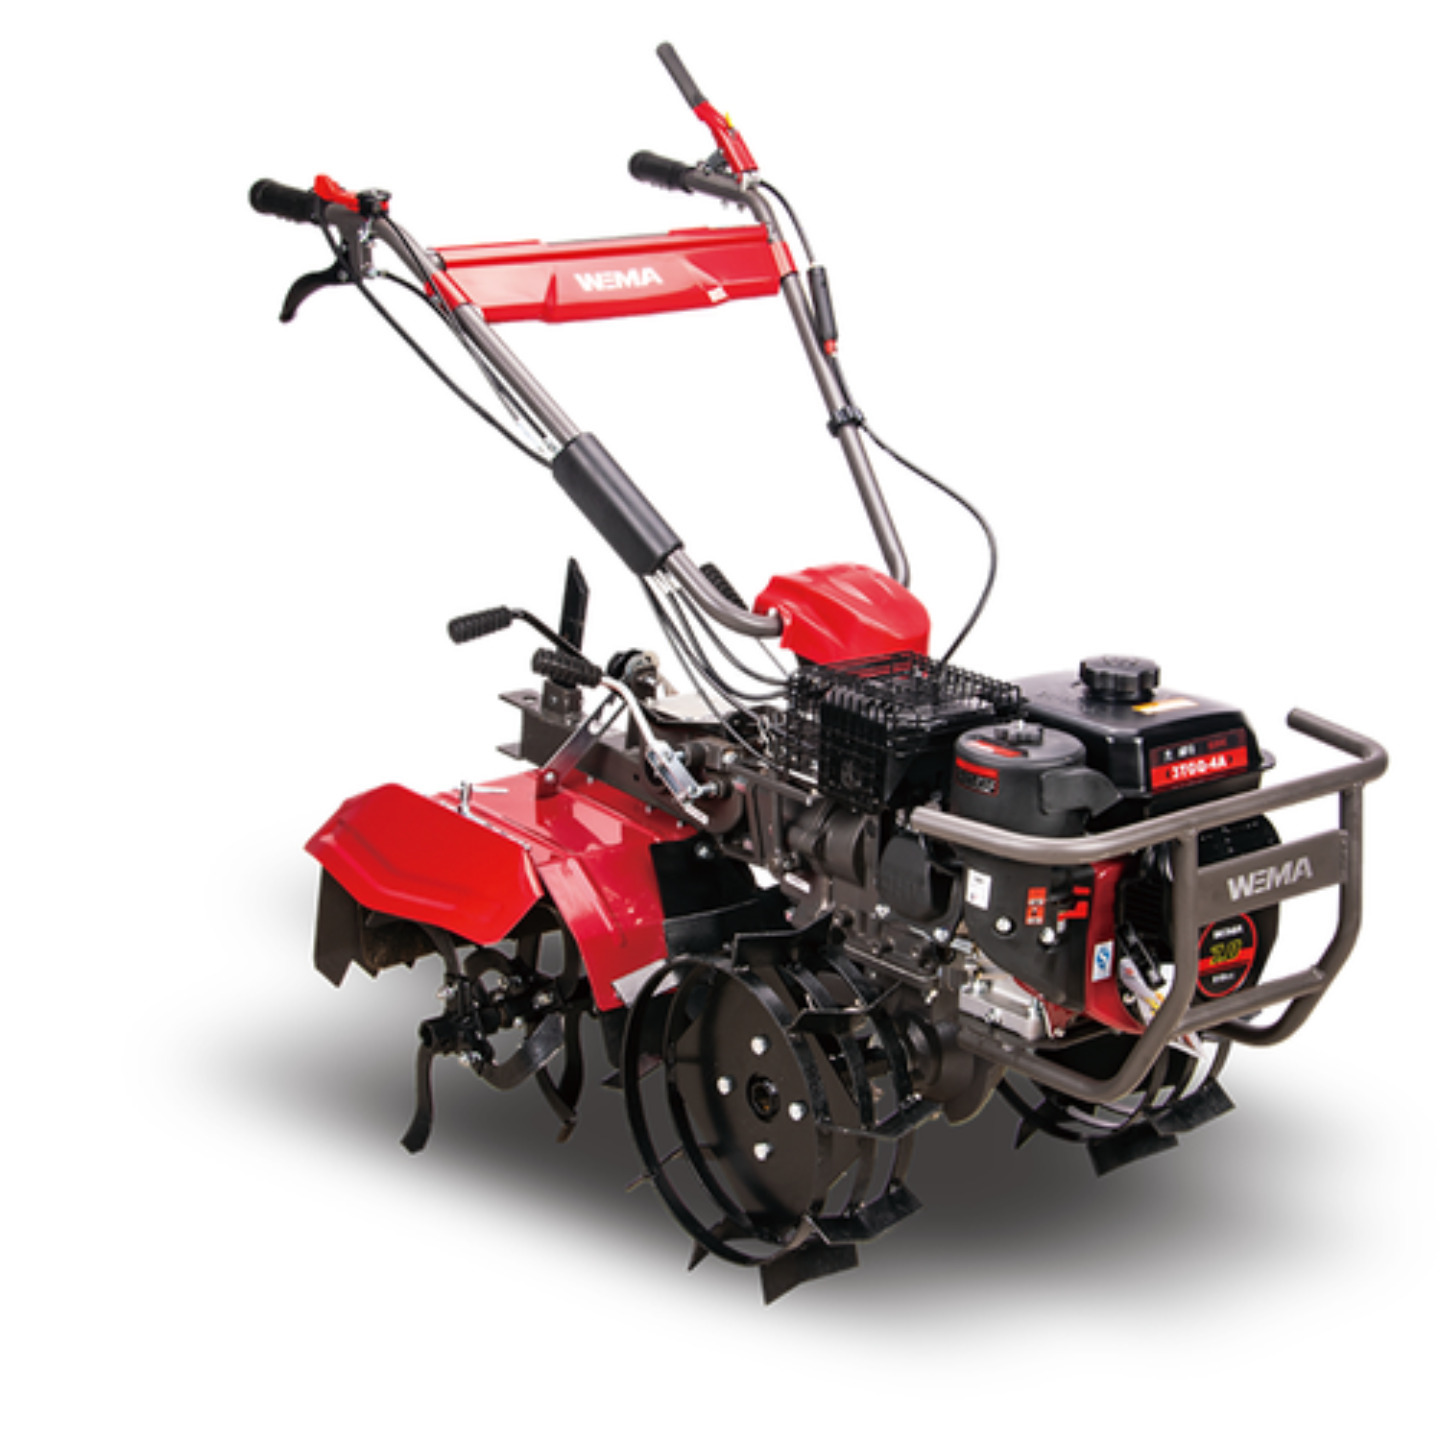 VIS-620A -1 BACK ROTARY POWER WEEDER